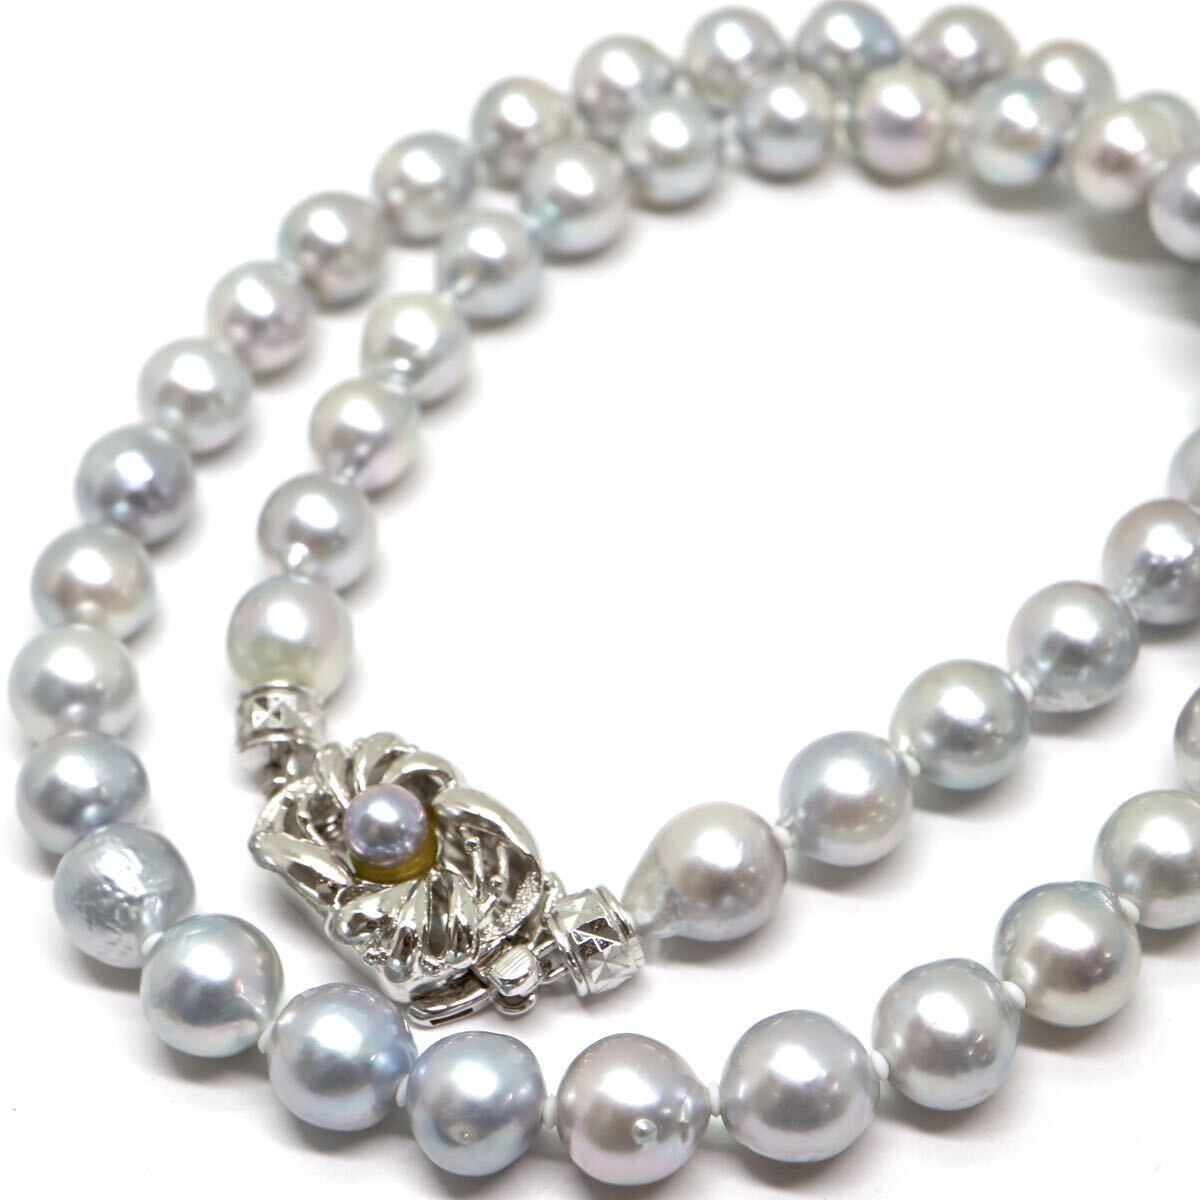 《K14WGアコヤ本真珠ネックレス》A 約7.0-7.5mm珠 31.3g 約43cm pearl necklace ジュエリー jewelry DH0/ZZ_画像1